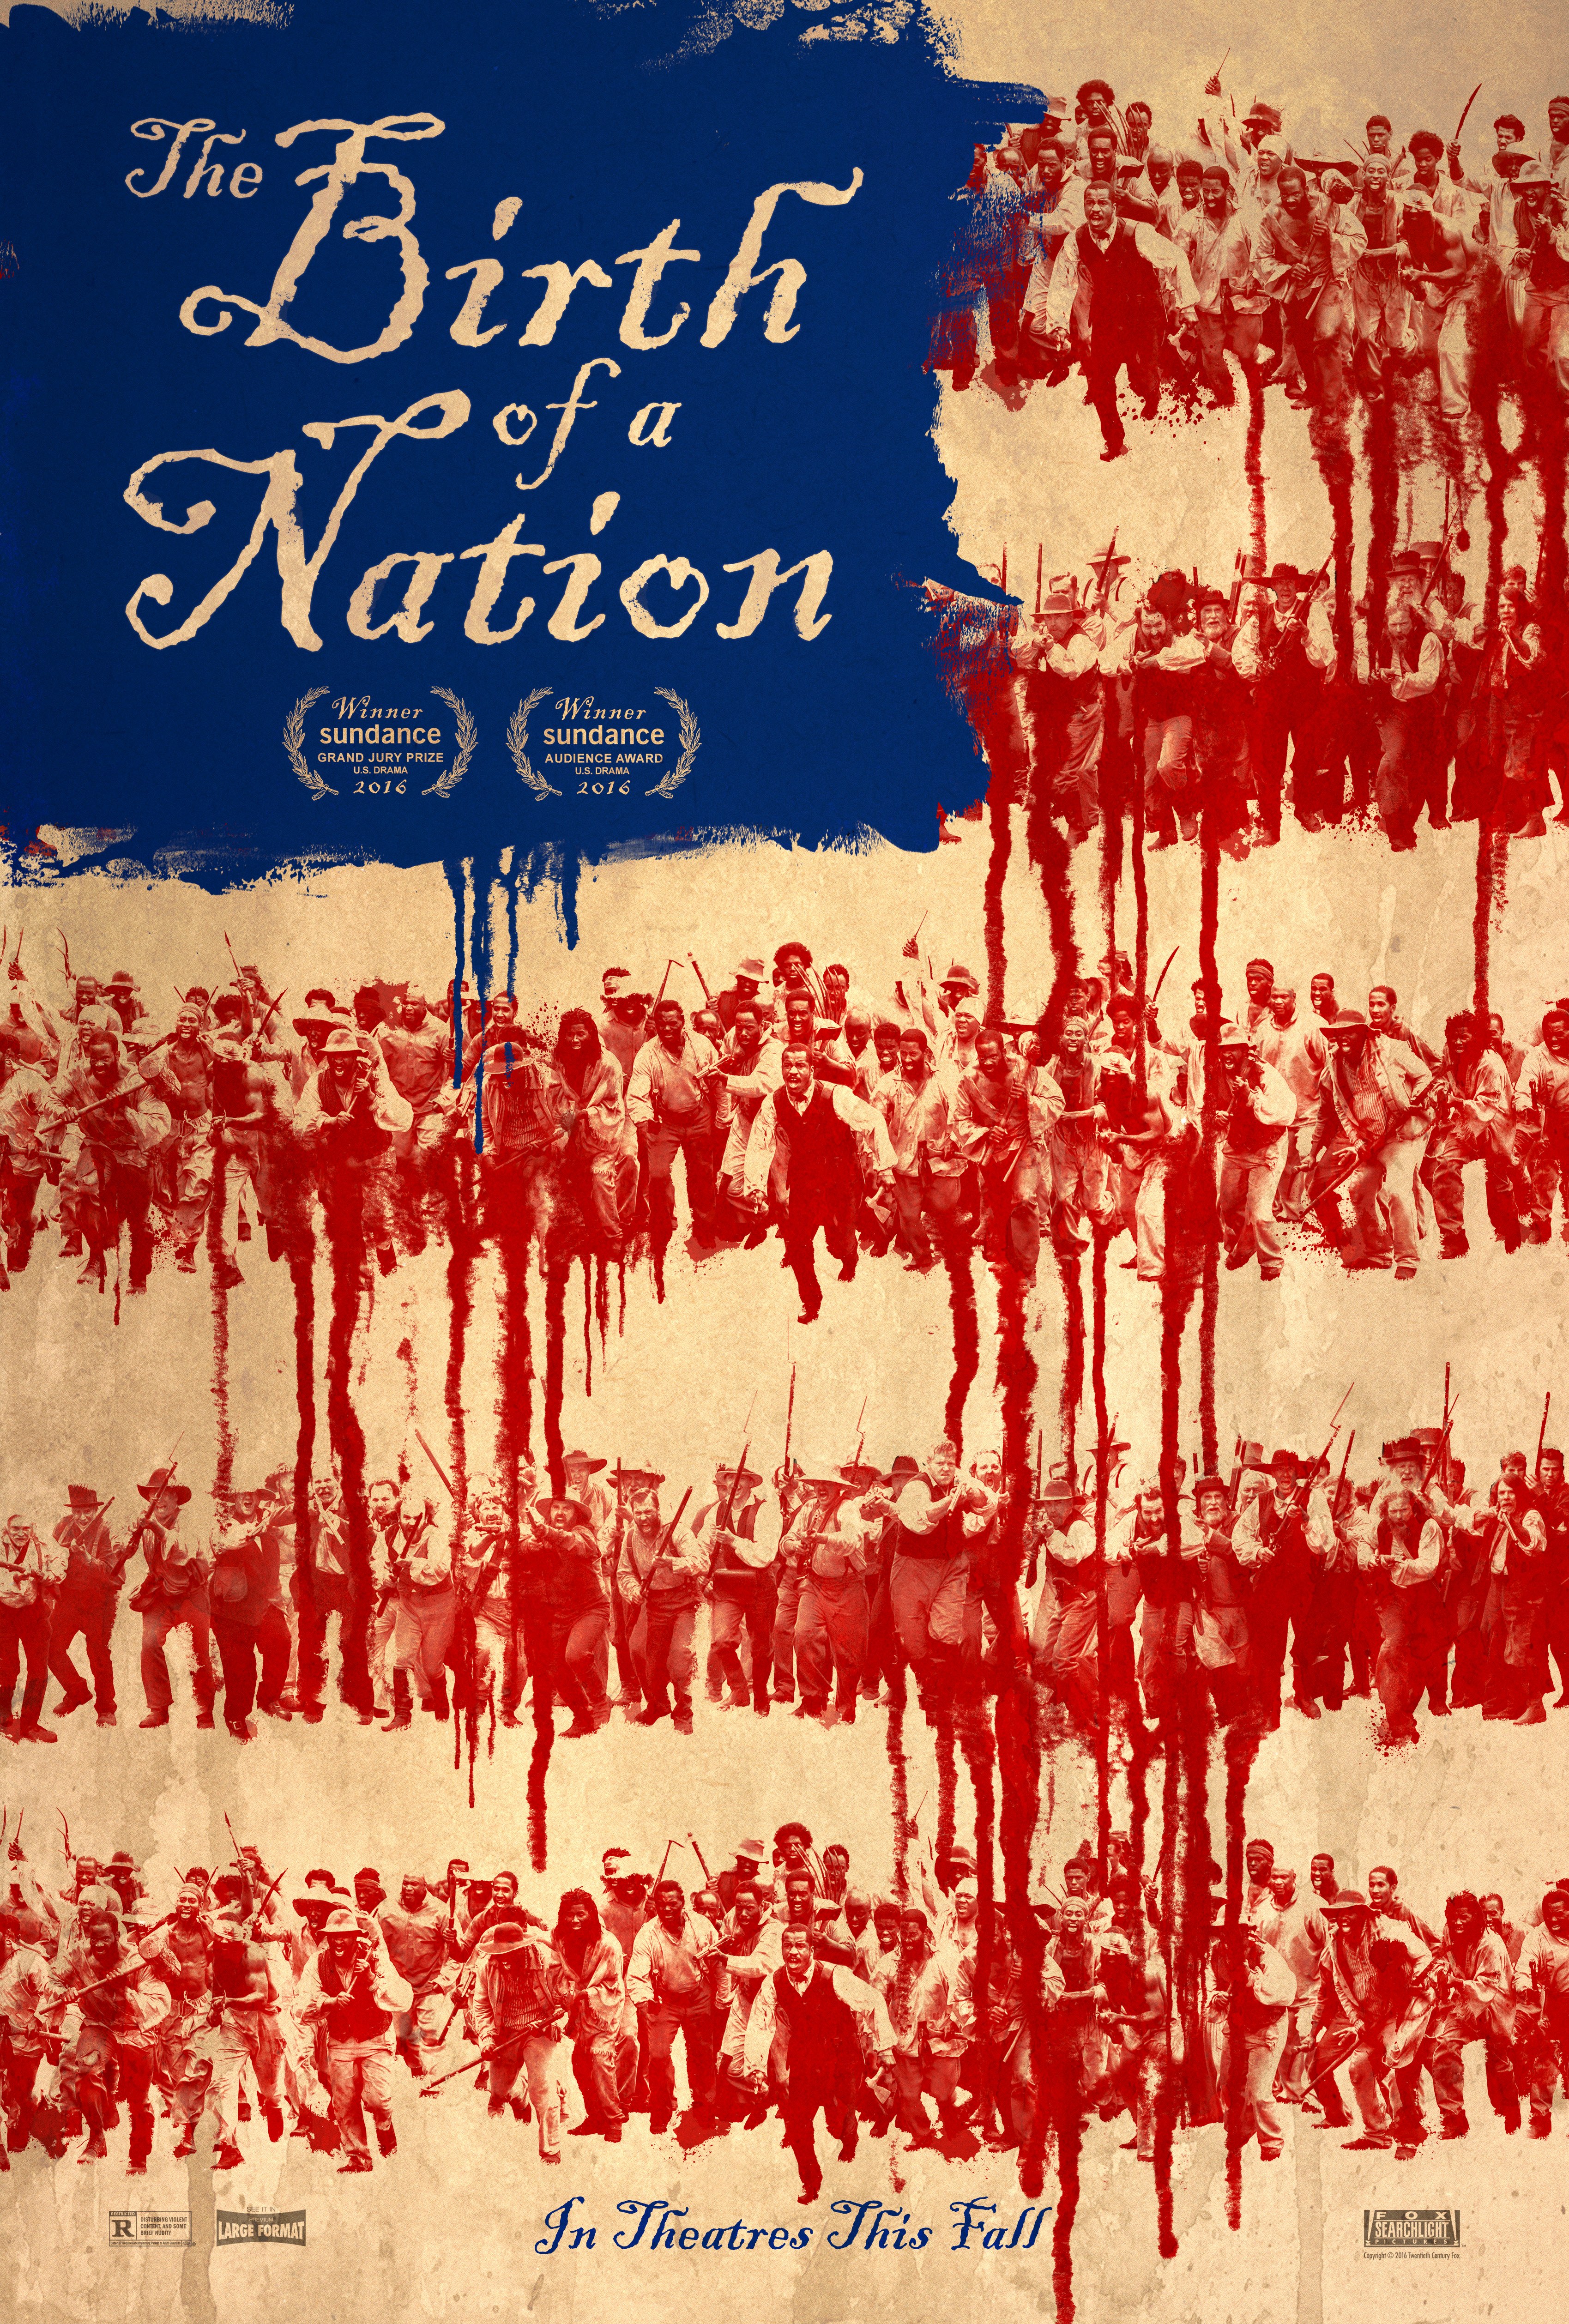 The Birth Of A Nation (2016) Main Poster